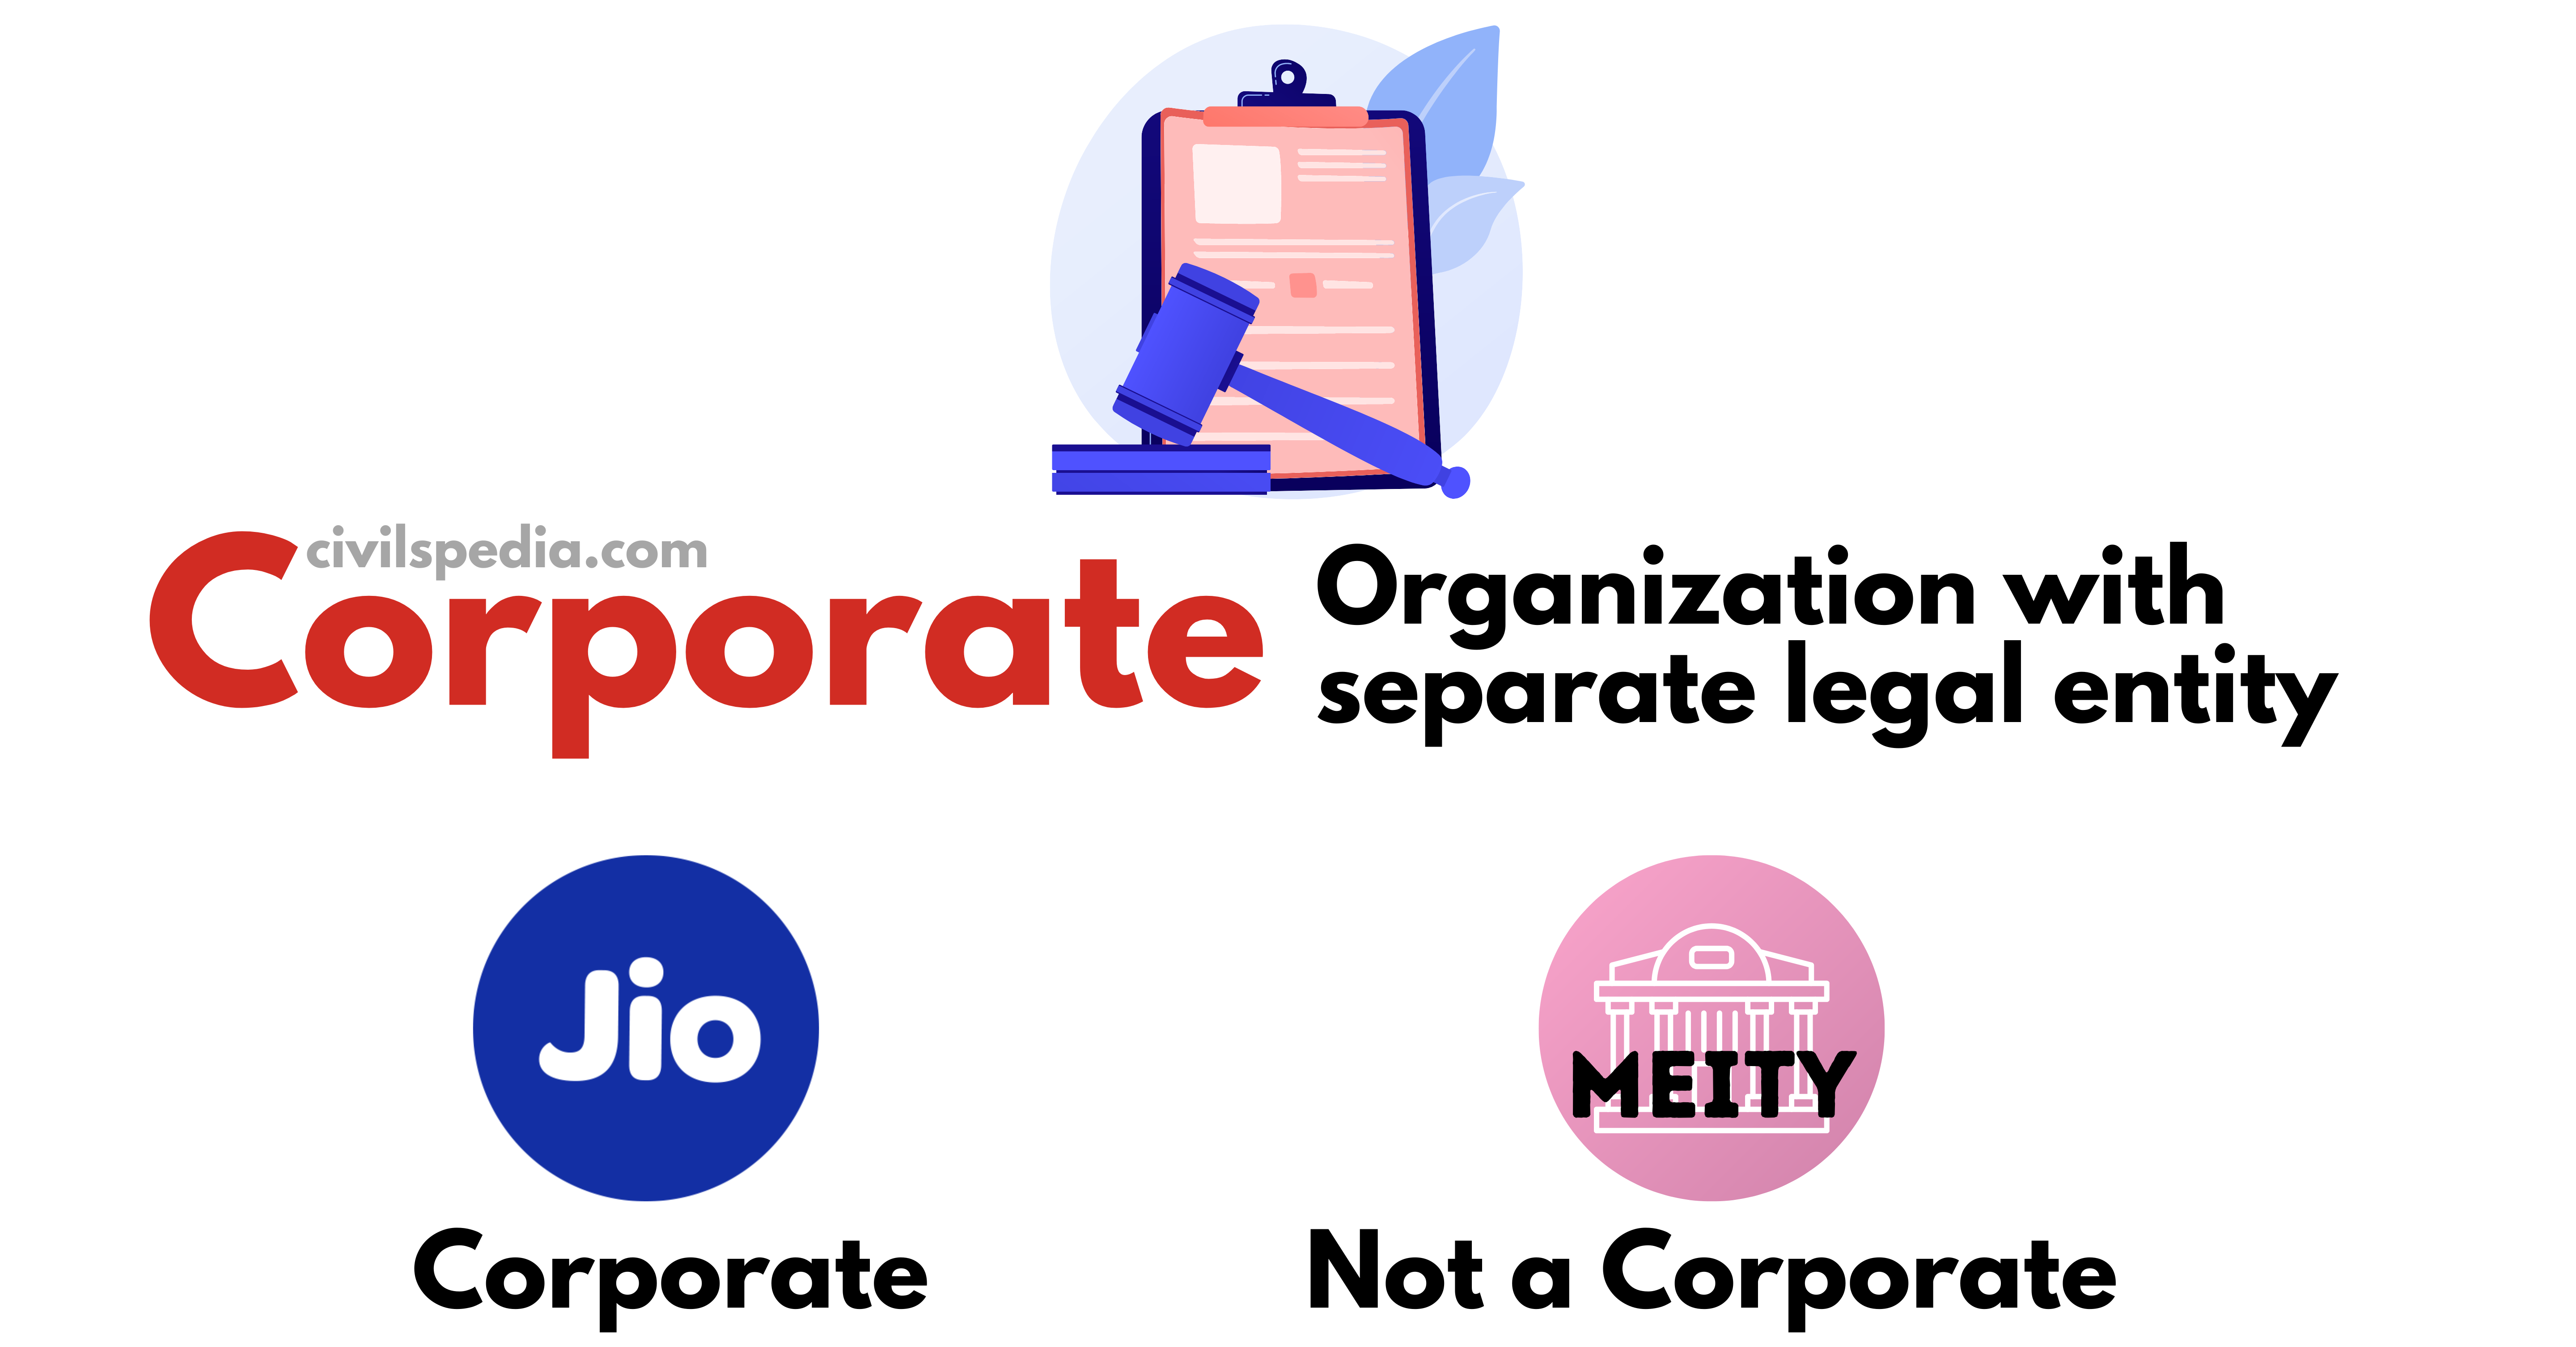 The concept of Corporate Governance